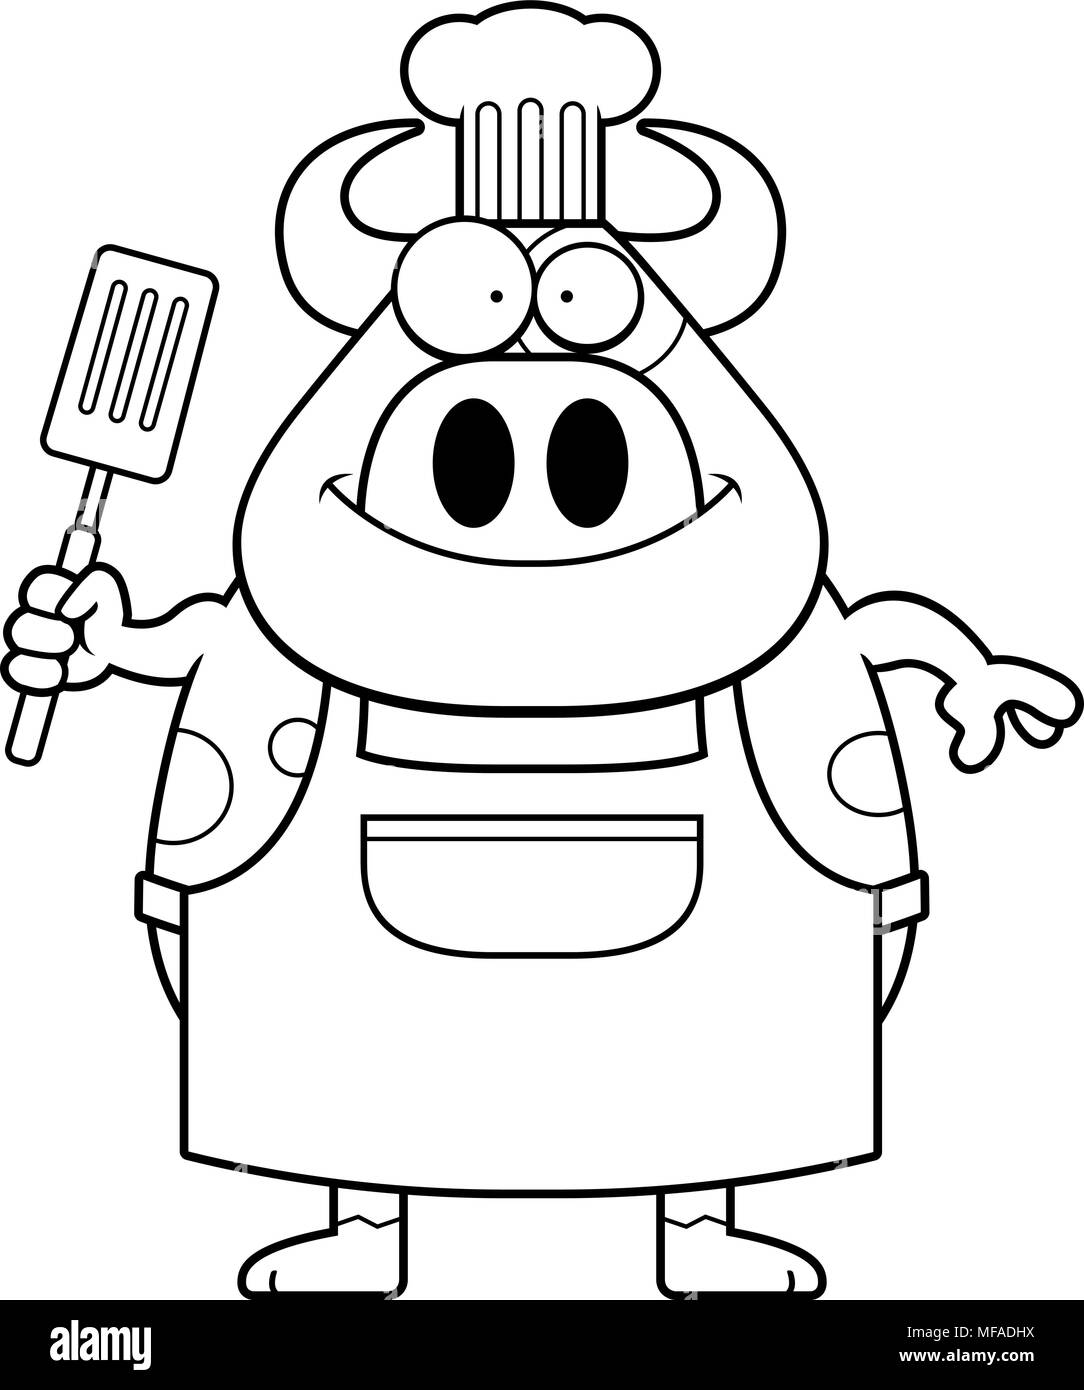 A cartoon illustration of a cow chef looking happy. Stock Vector